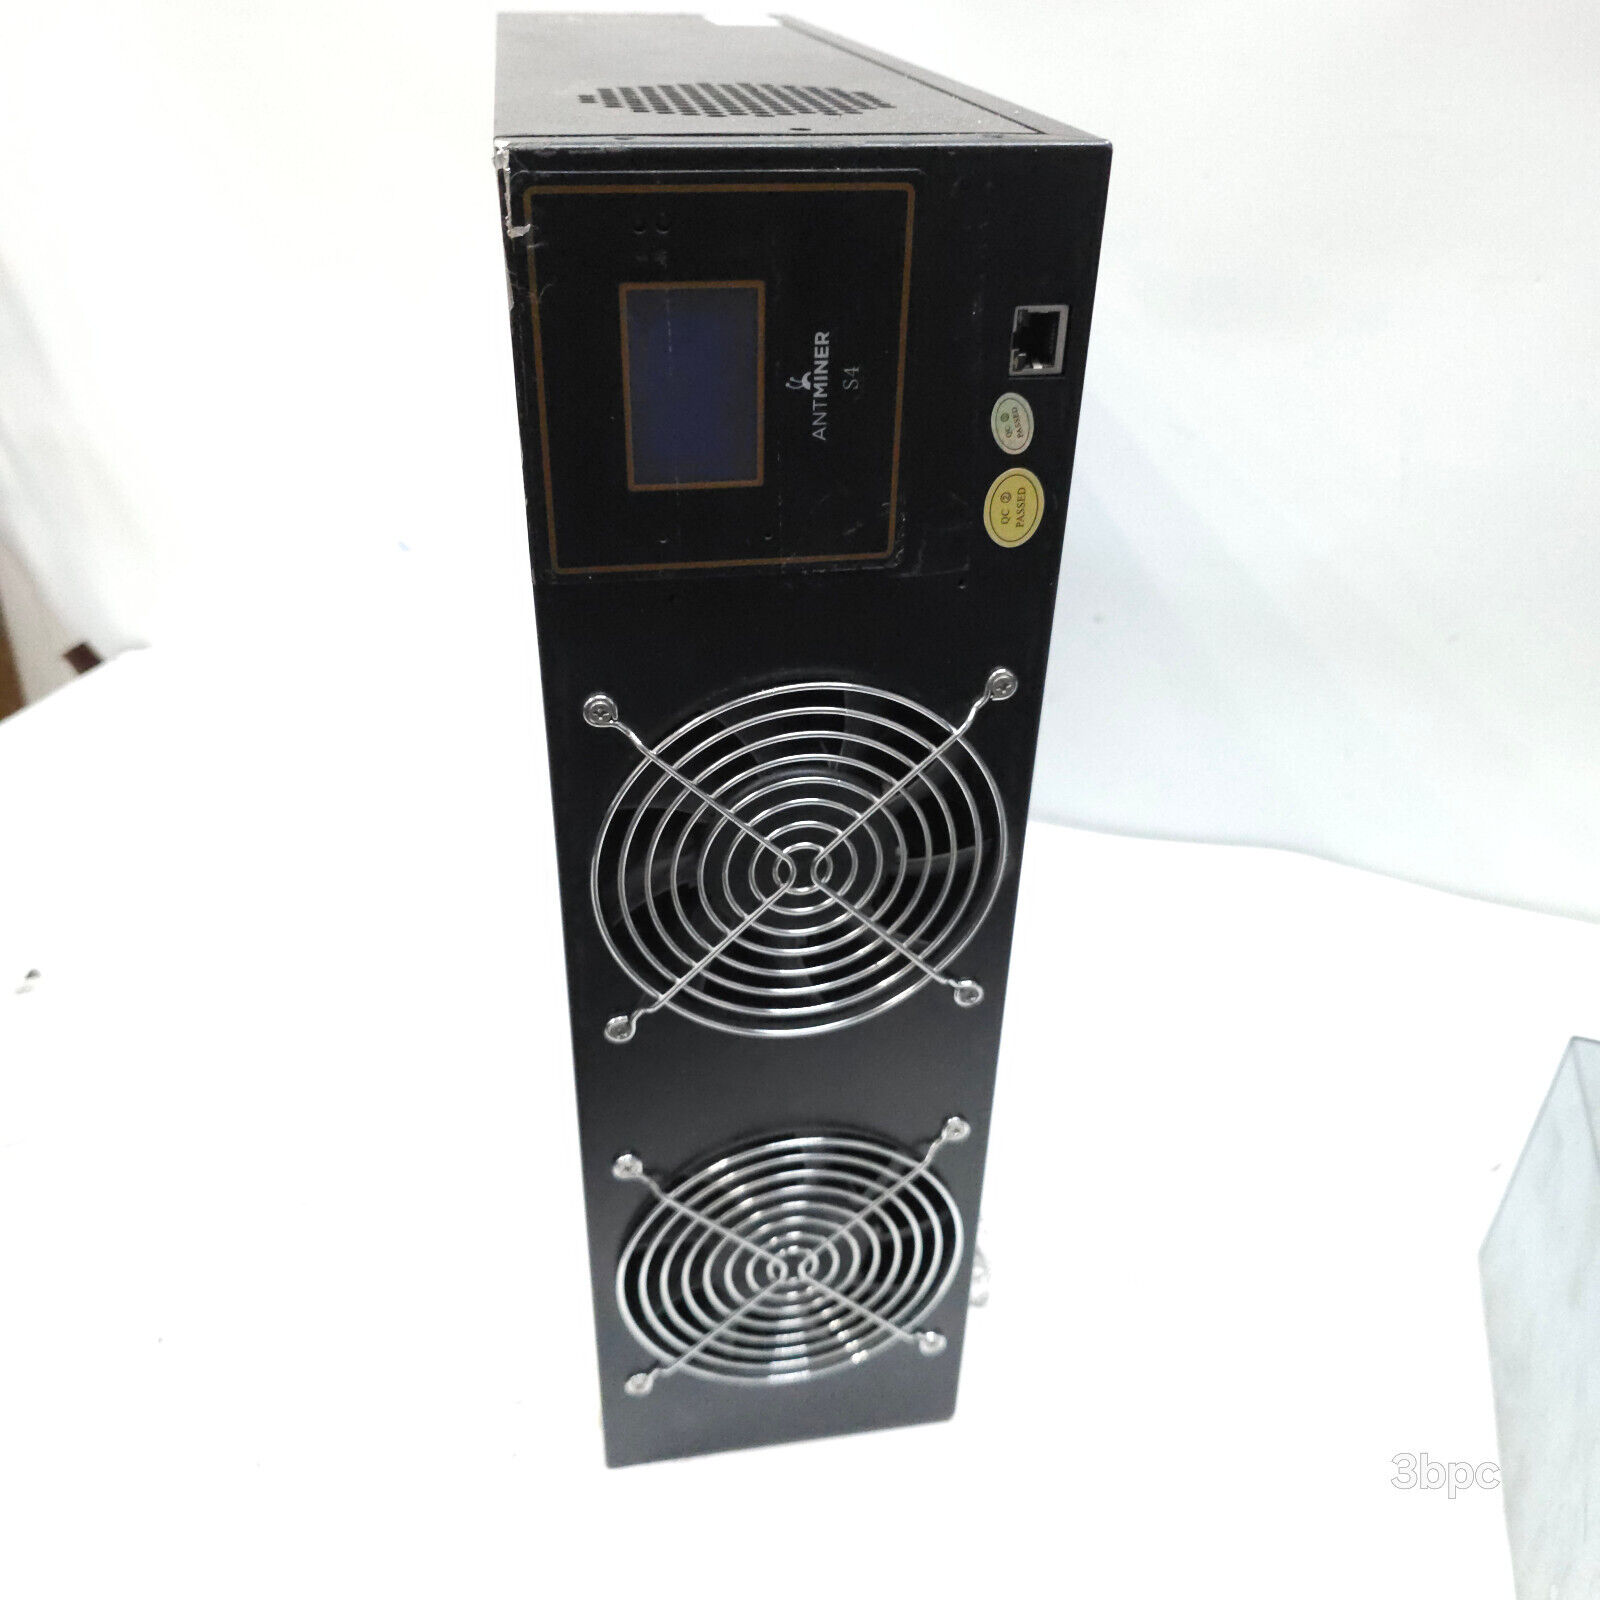 Bitmain Antminer S4 tested working low hours btc miner